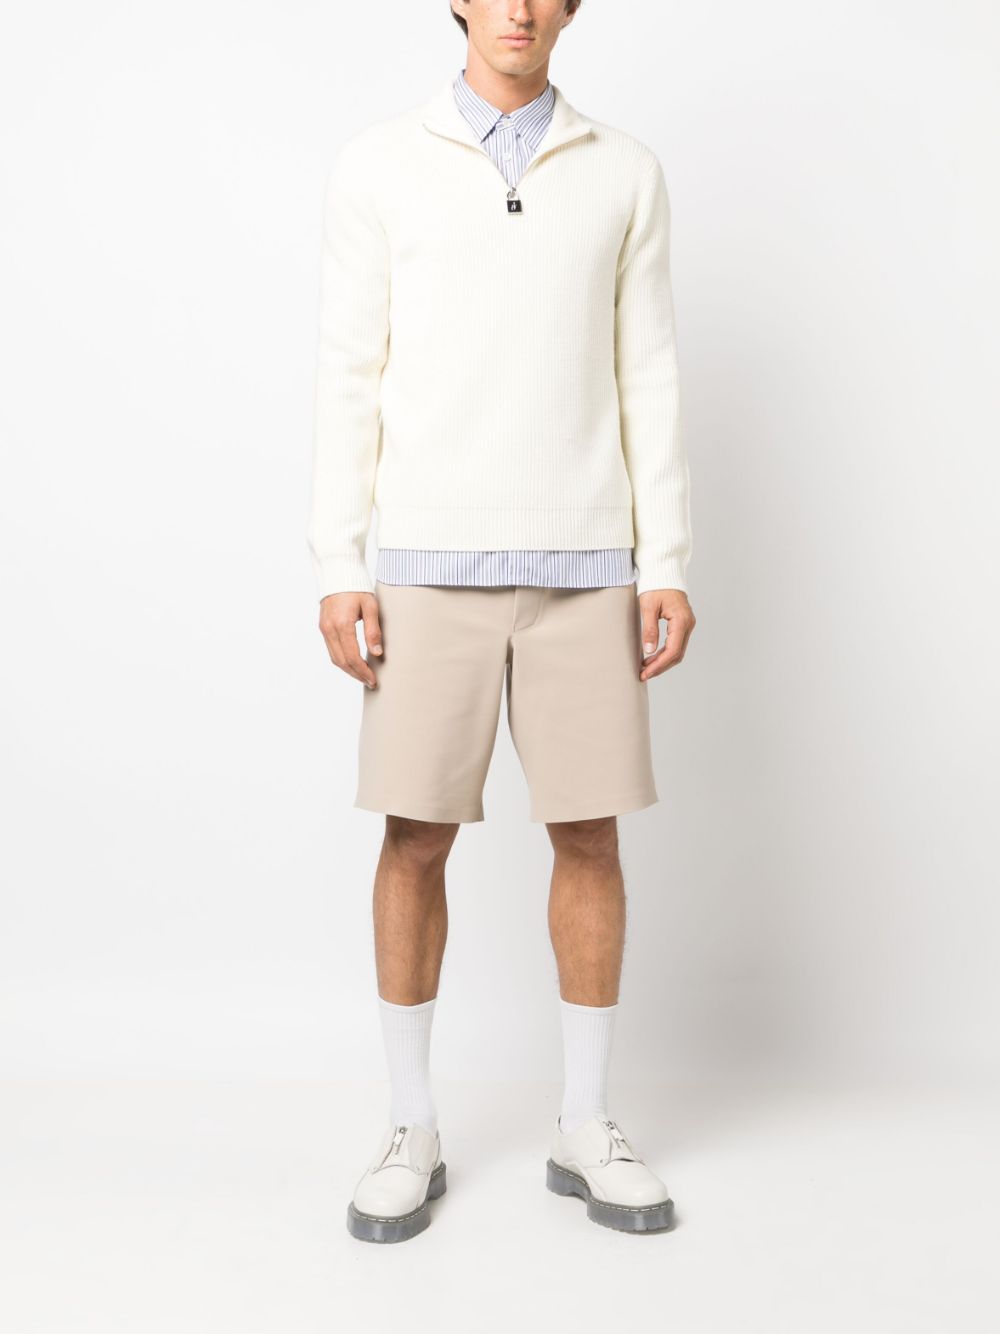 JW Anderson high-neck zip-up wool sweater - 002 OFF WHITE